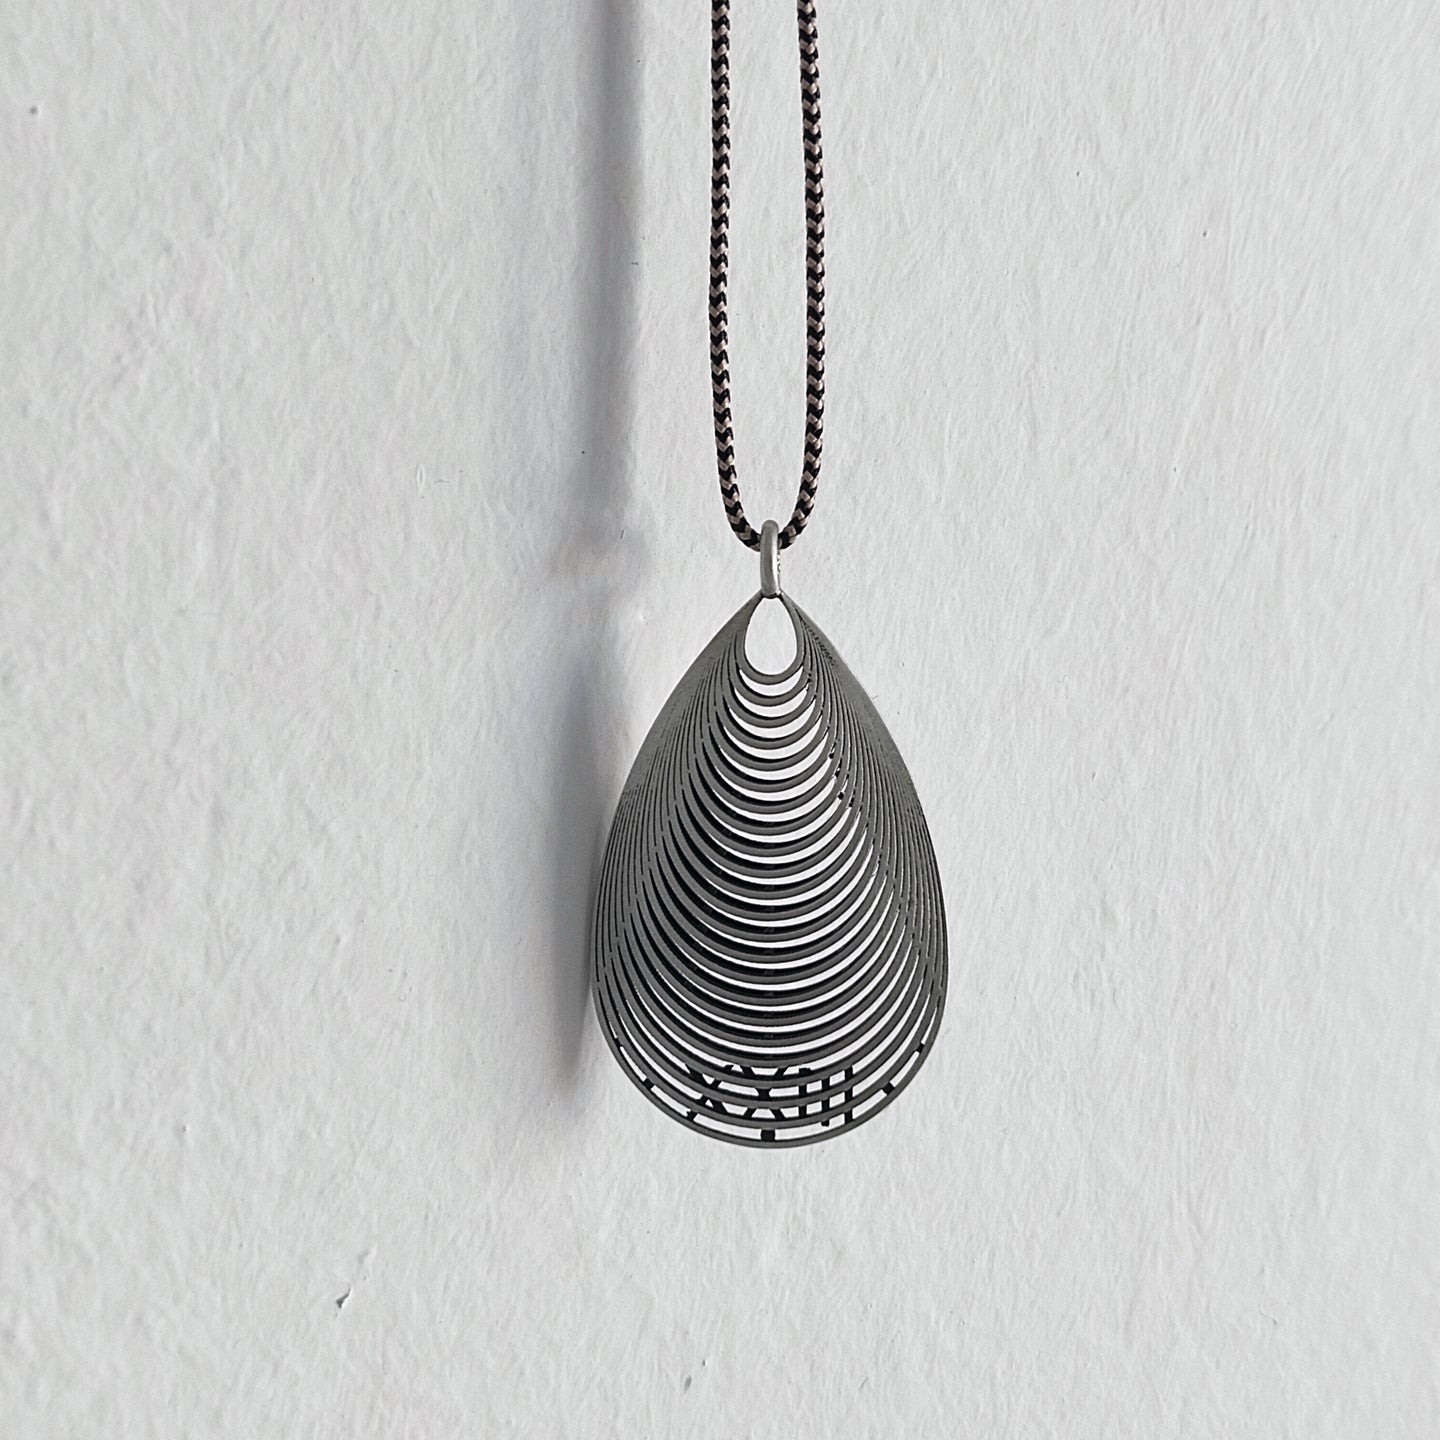 SEEDS NECKLACE